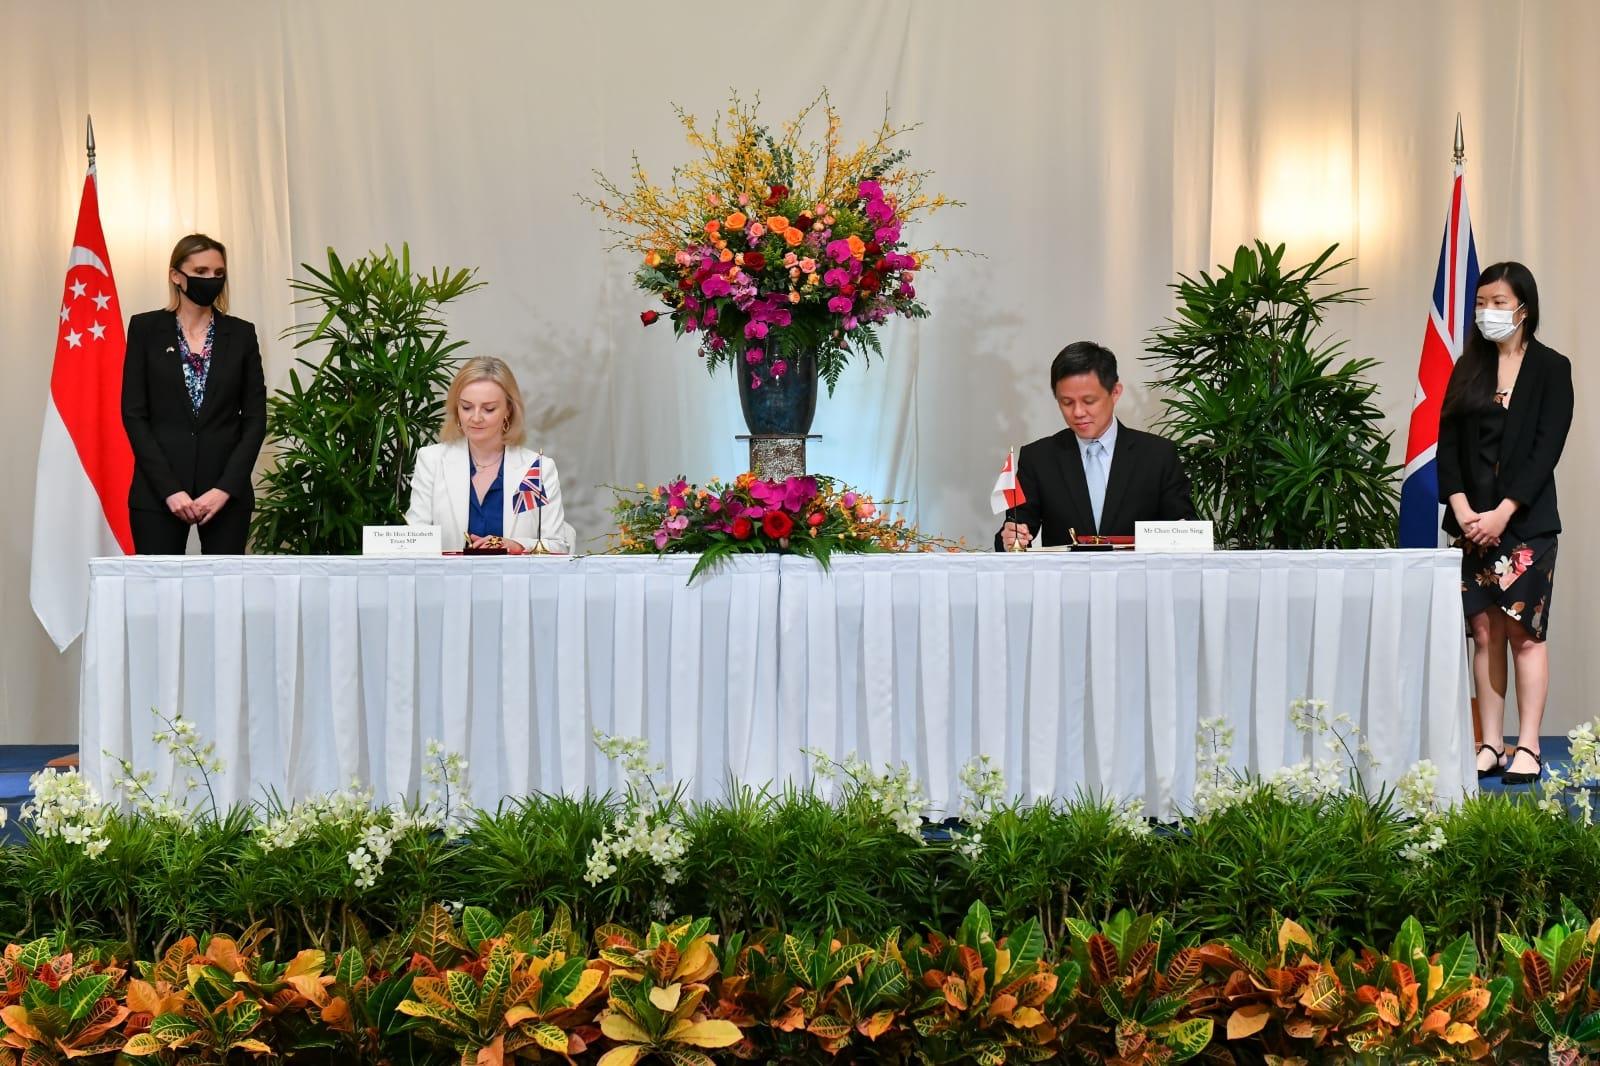 Britain's trade minister Liz Truss and her Singapore counterpart Chan Chun Sing sign the UK-Singapore Free Trade Agreement in Singapore today. Photo: Facebook